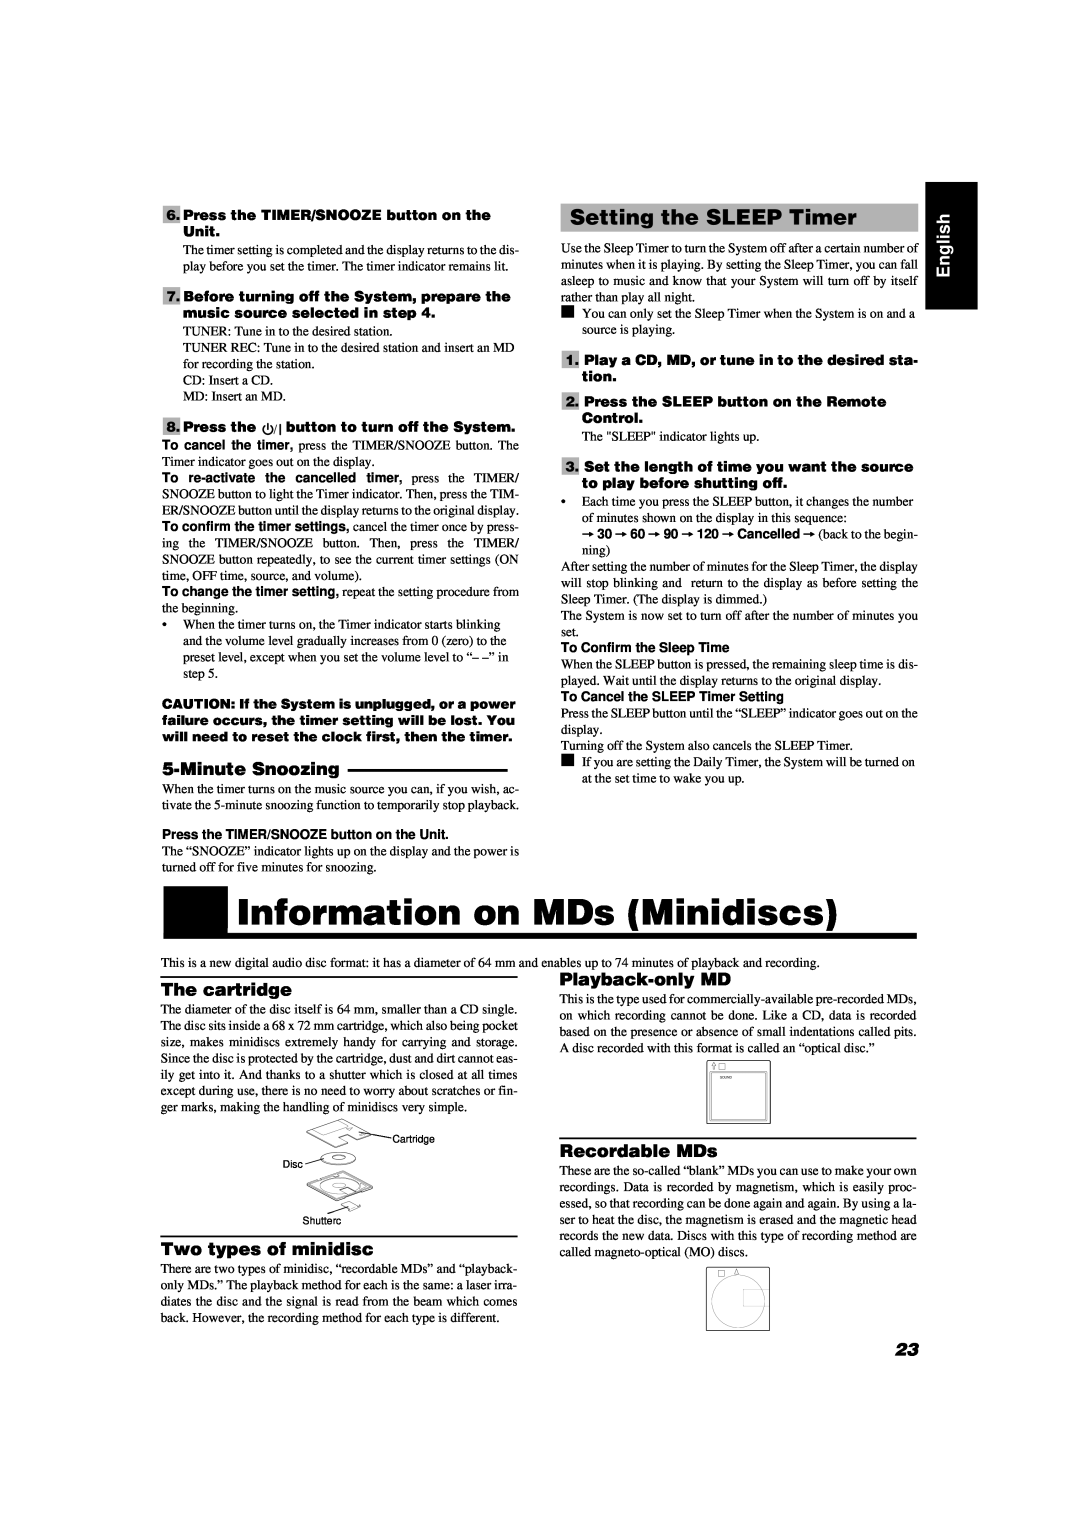 JVC UX-MD9000R Information on MDs Minidiscs, Setting the SLEEP Timer, MinuteSnoozing, The cartridge, Playback-onlyMD, Unit 